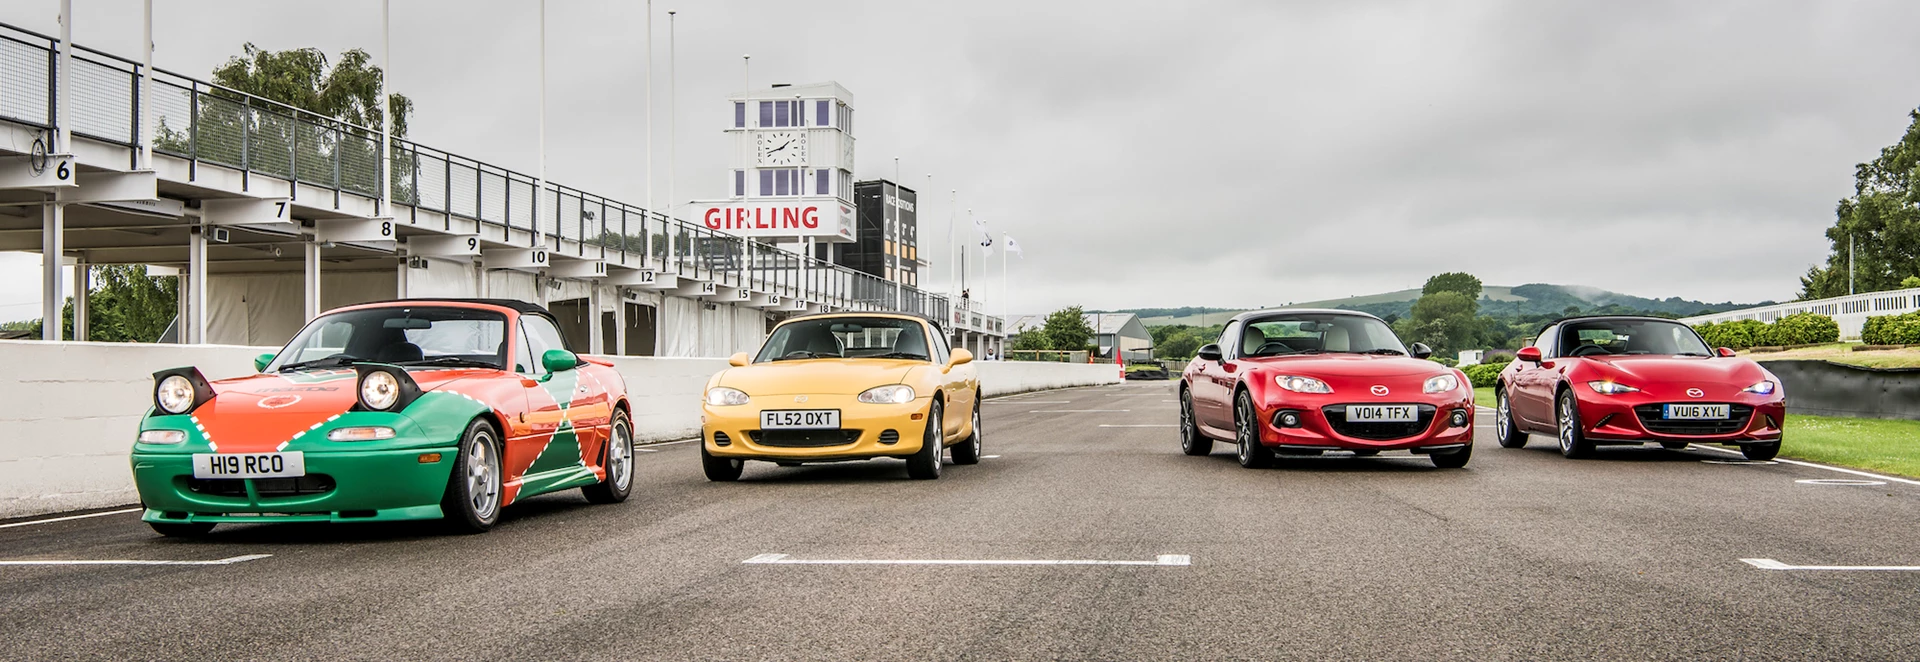 A celebration of 30 years of the Mazda MX-5 